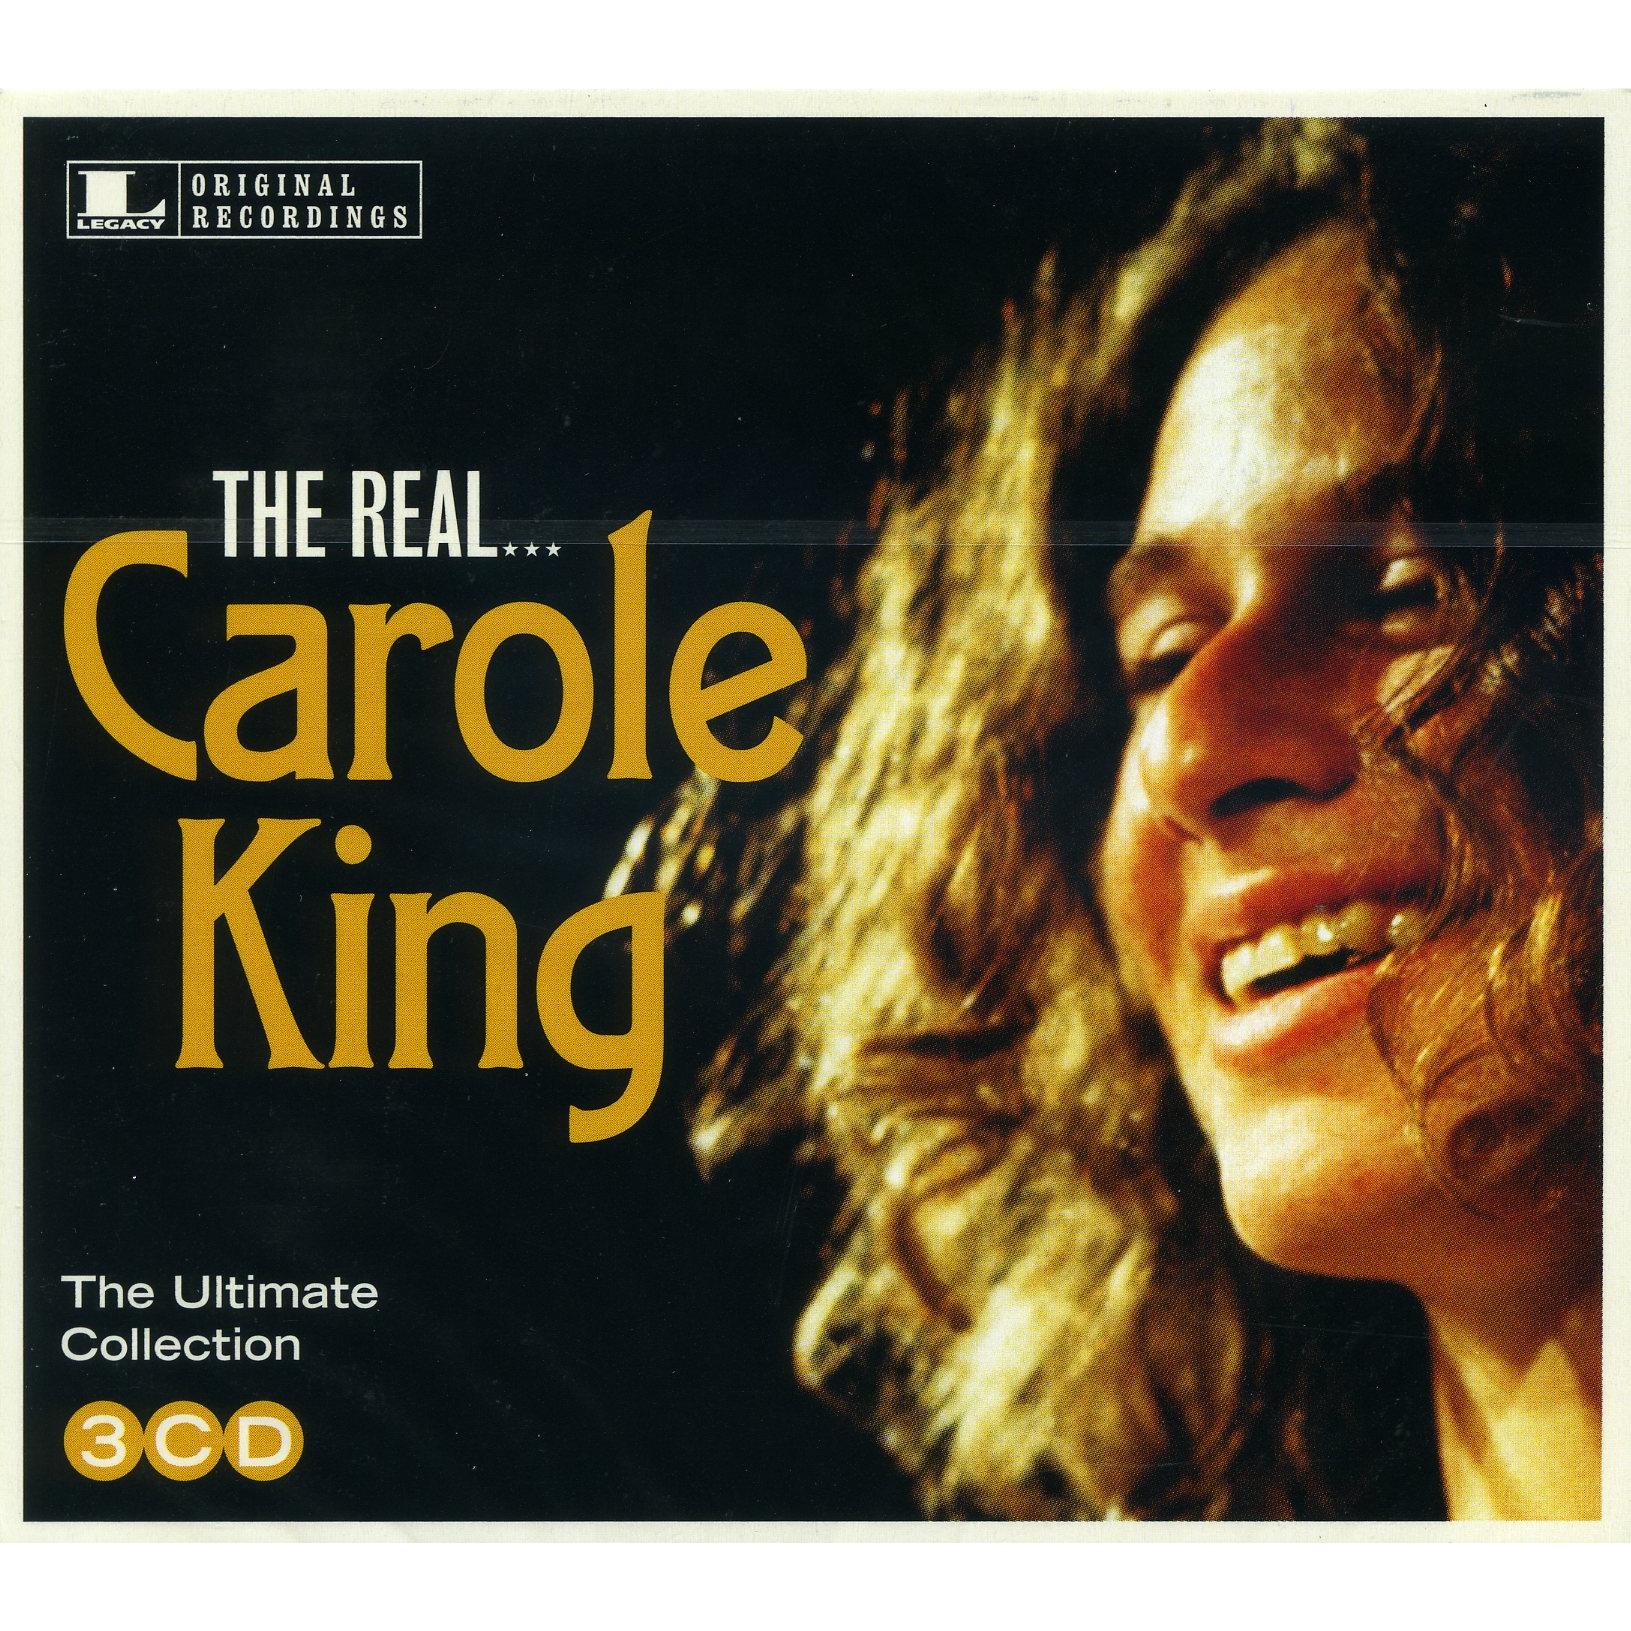 THE REAL... CAROLE KING